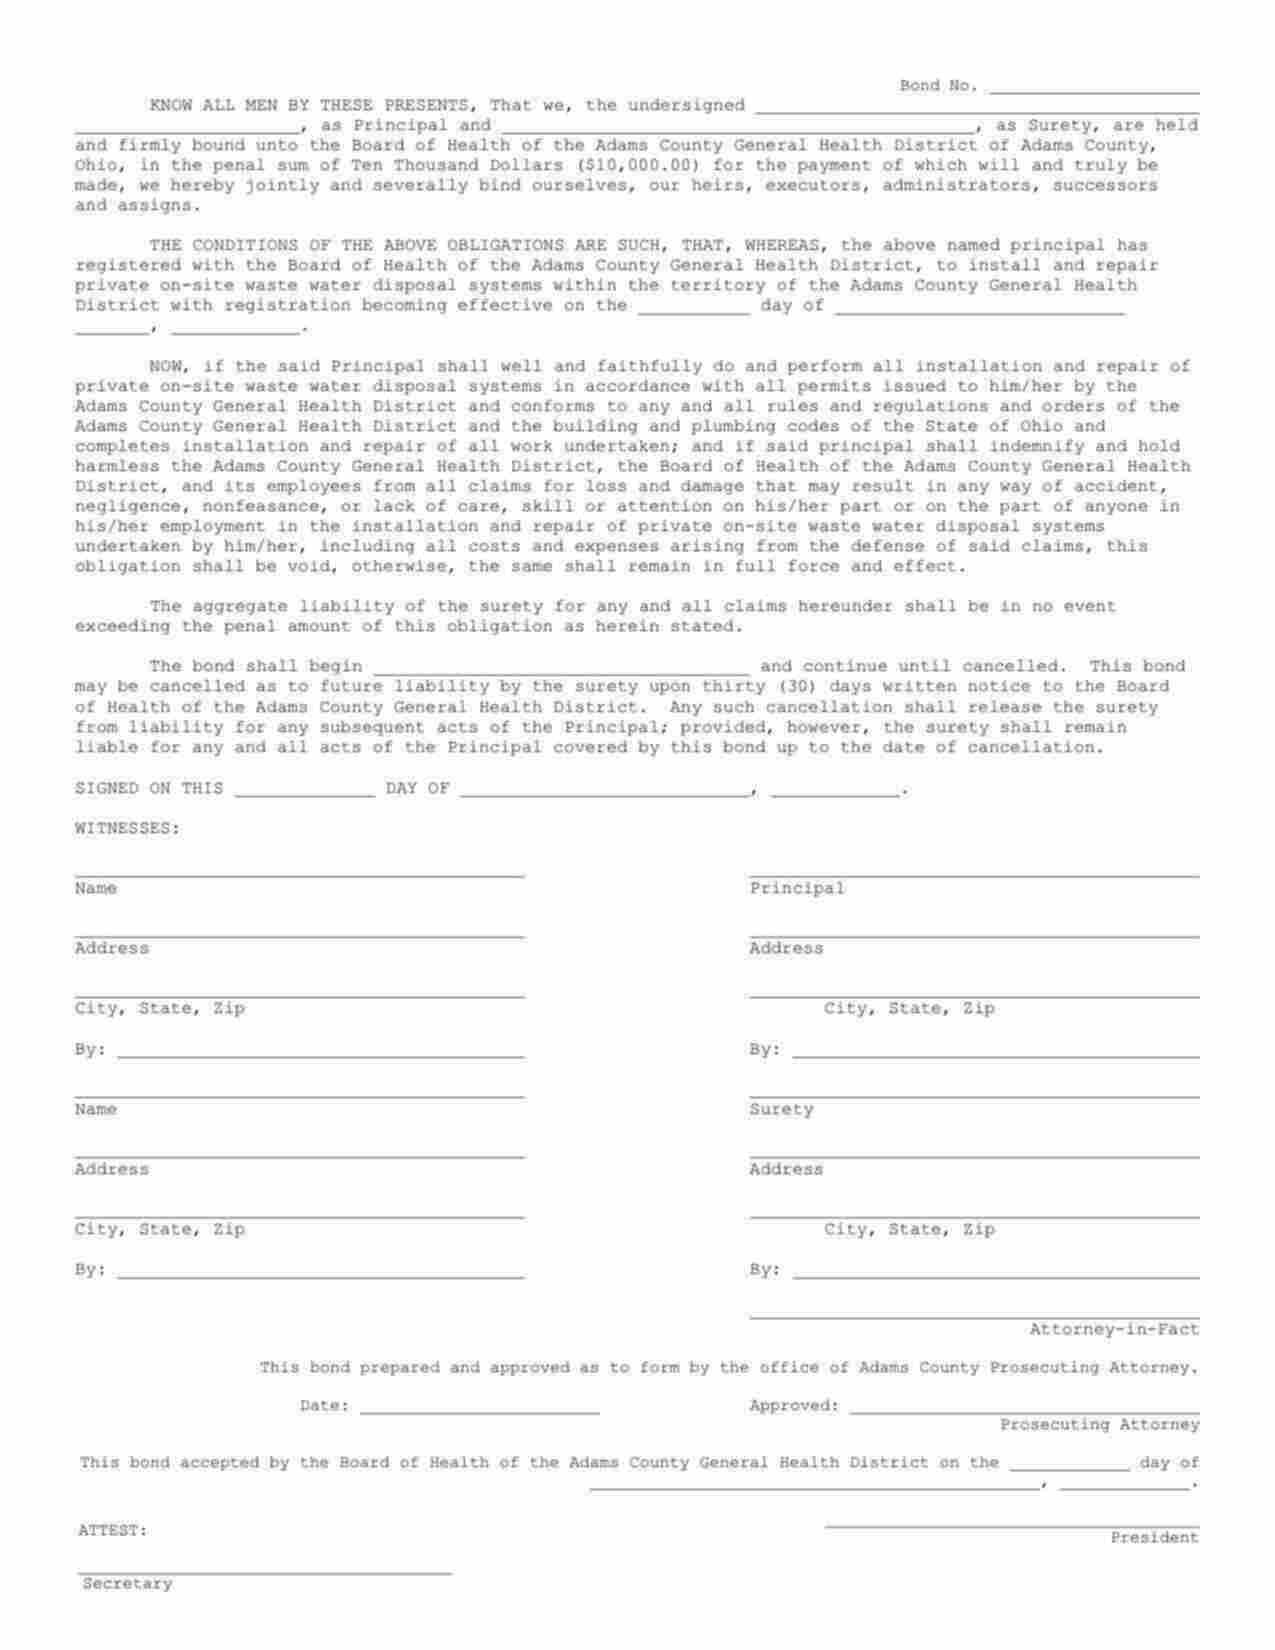 Ohio Waste Water Disposal Systems Installation and Repair Bond Form